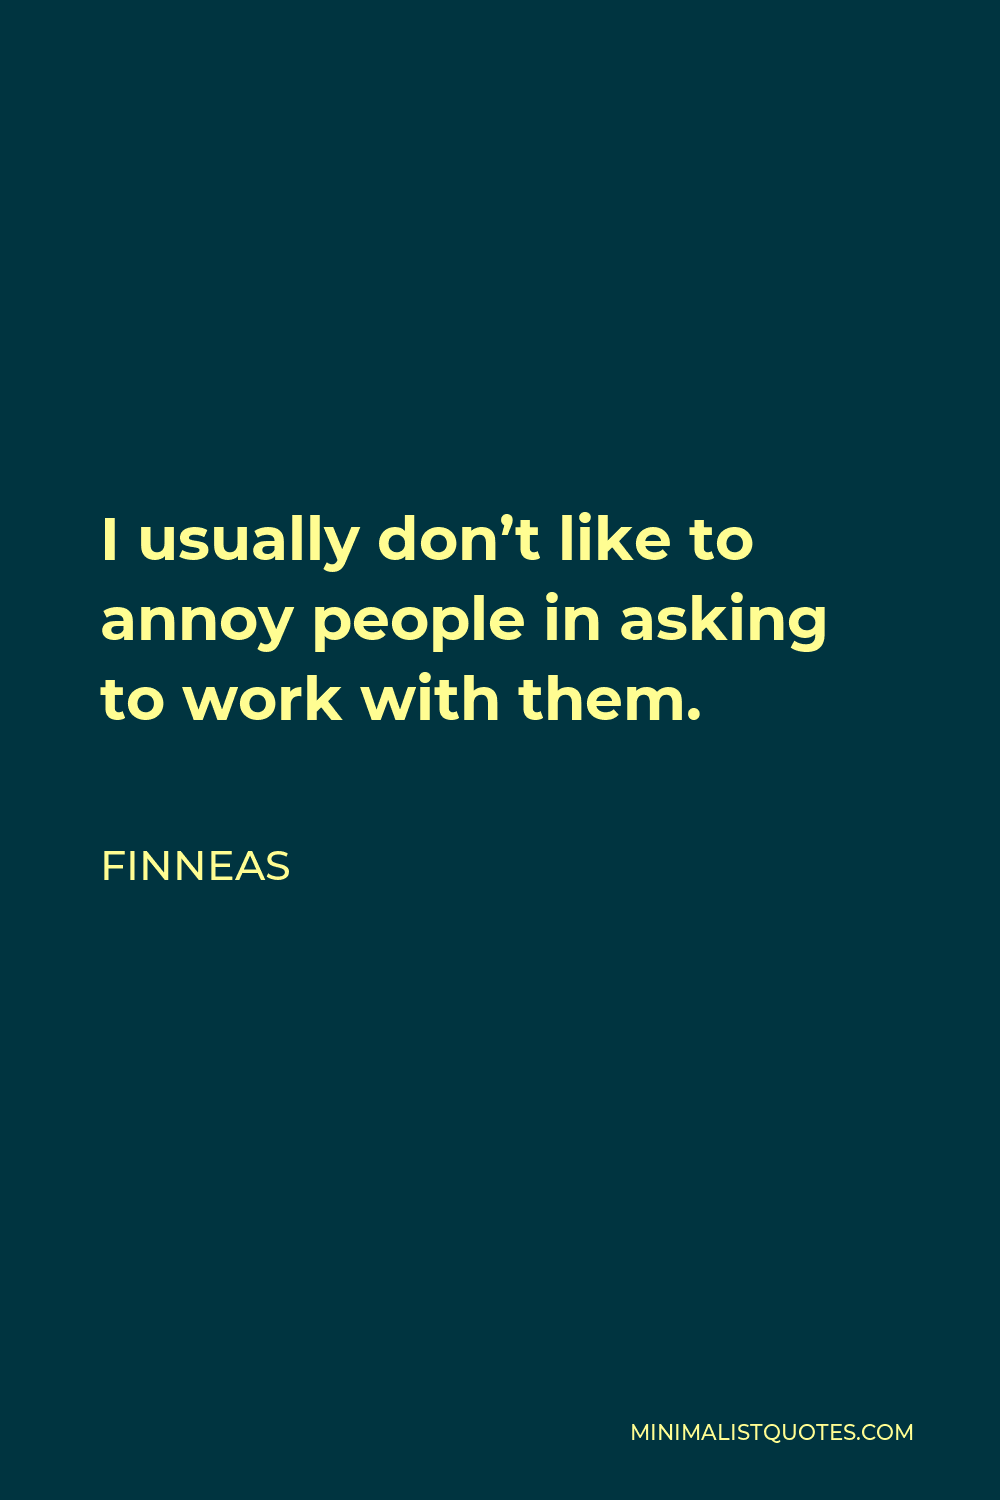 Finneas Quote - I usually don’t like to annoy people in asking to work with them.